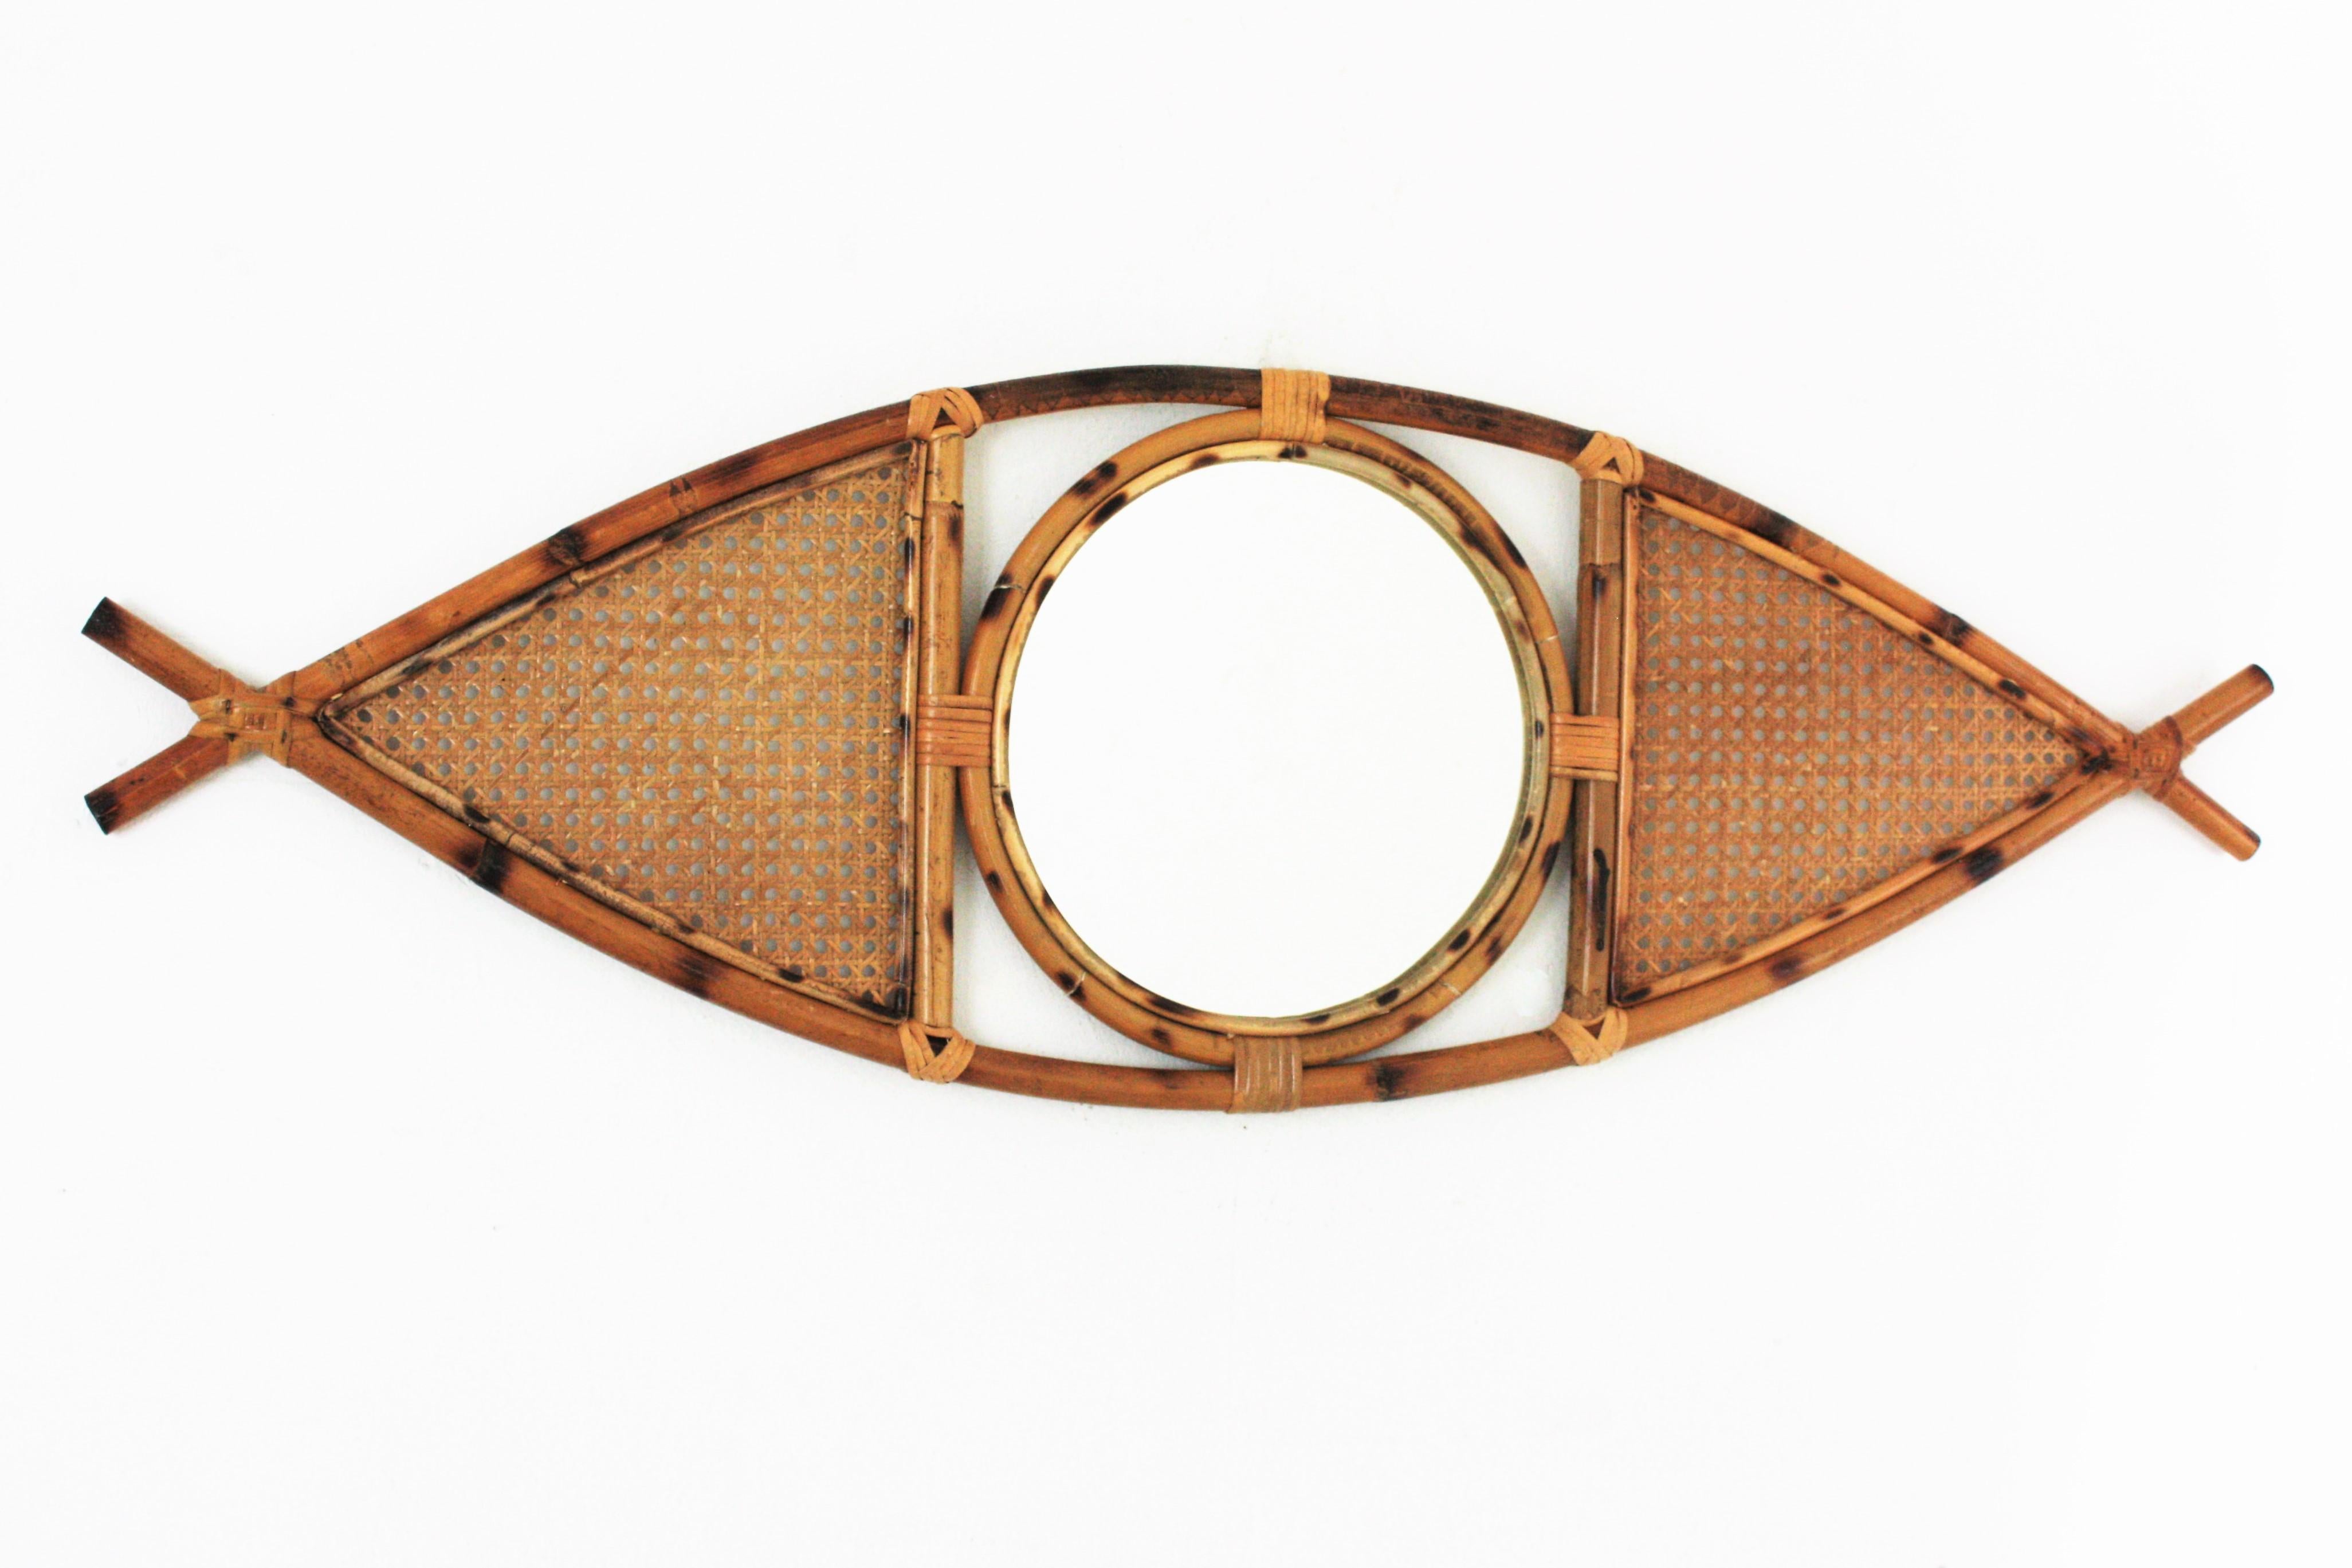 French Riviera Bamboo and rattan eye shaped mirror. France, 1960s.
This cool mediterranean mirror features a rattan / bamboo structure with the shape of an eye, adorned by woven wicker panels at both sides of the central round glass.
This mirror